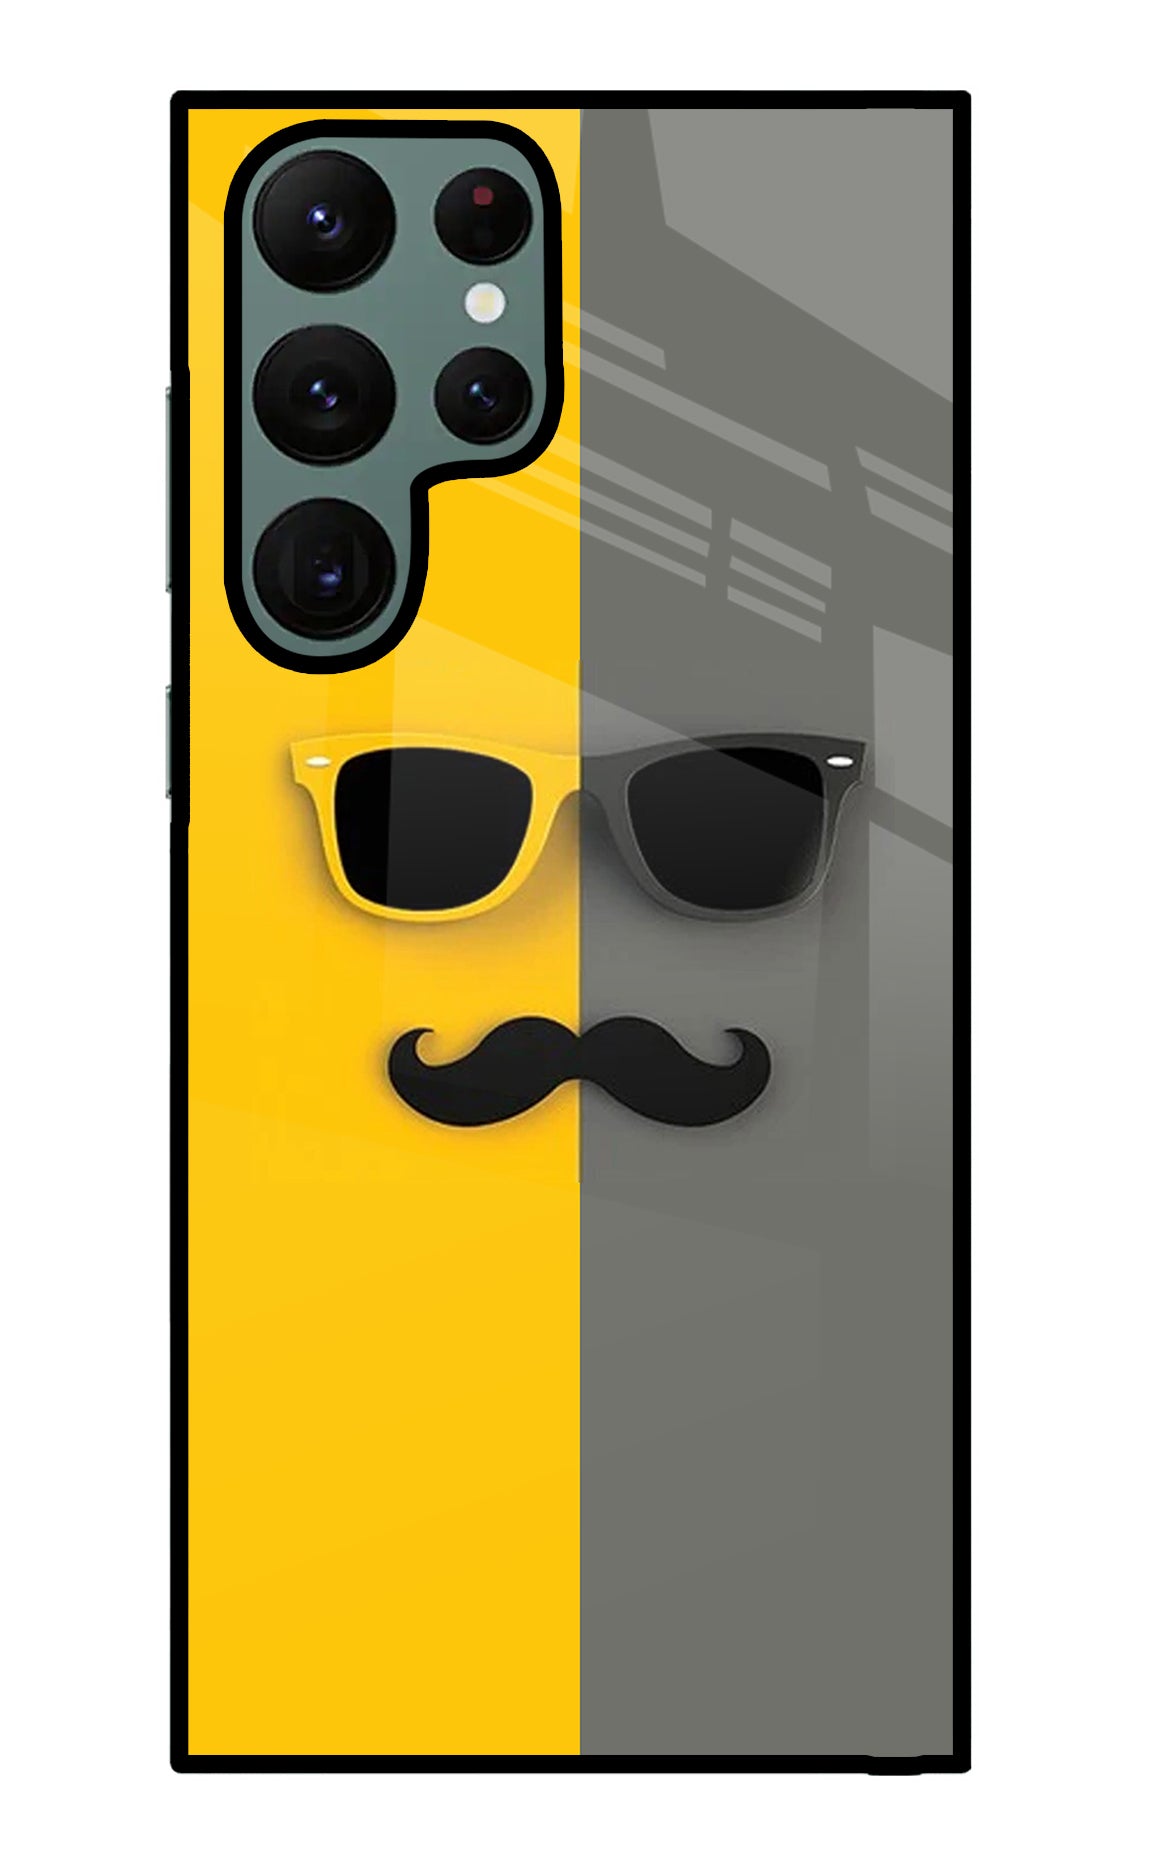 Sunglasses with Mustache Samsung S22 Ultra Back Cover